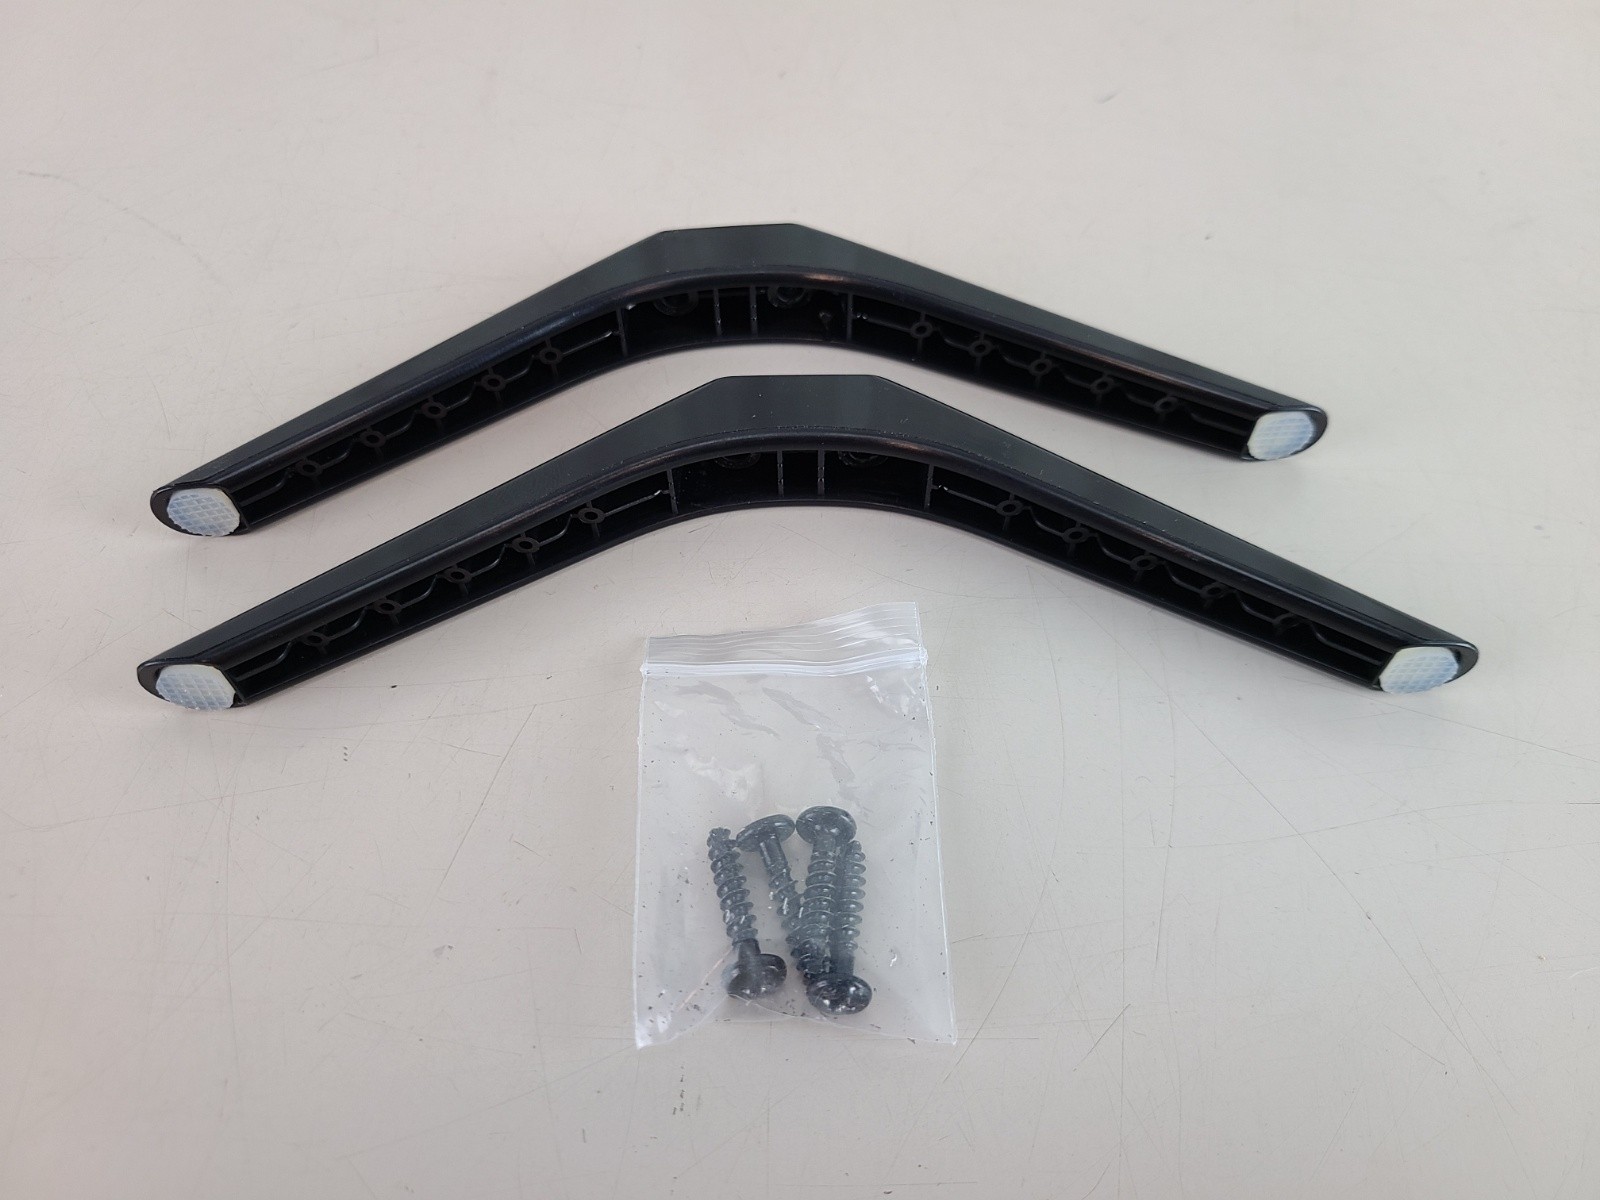 TCL 32" Roku Android TV Feet/Stand 32S327 NEW & Screws 68-32D29B